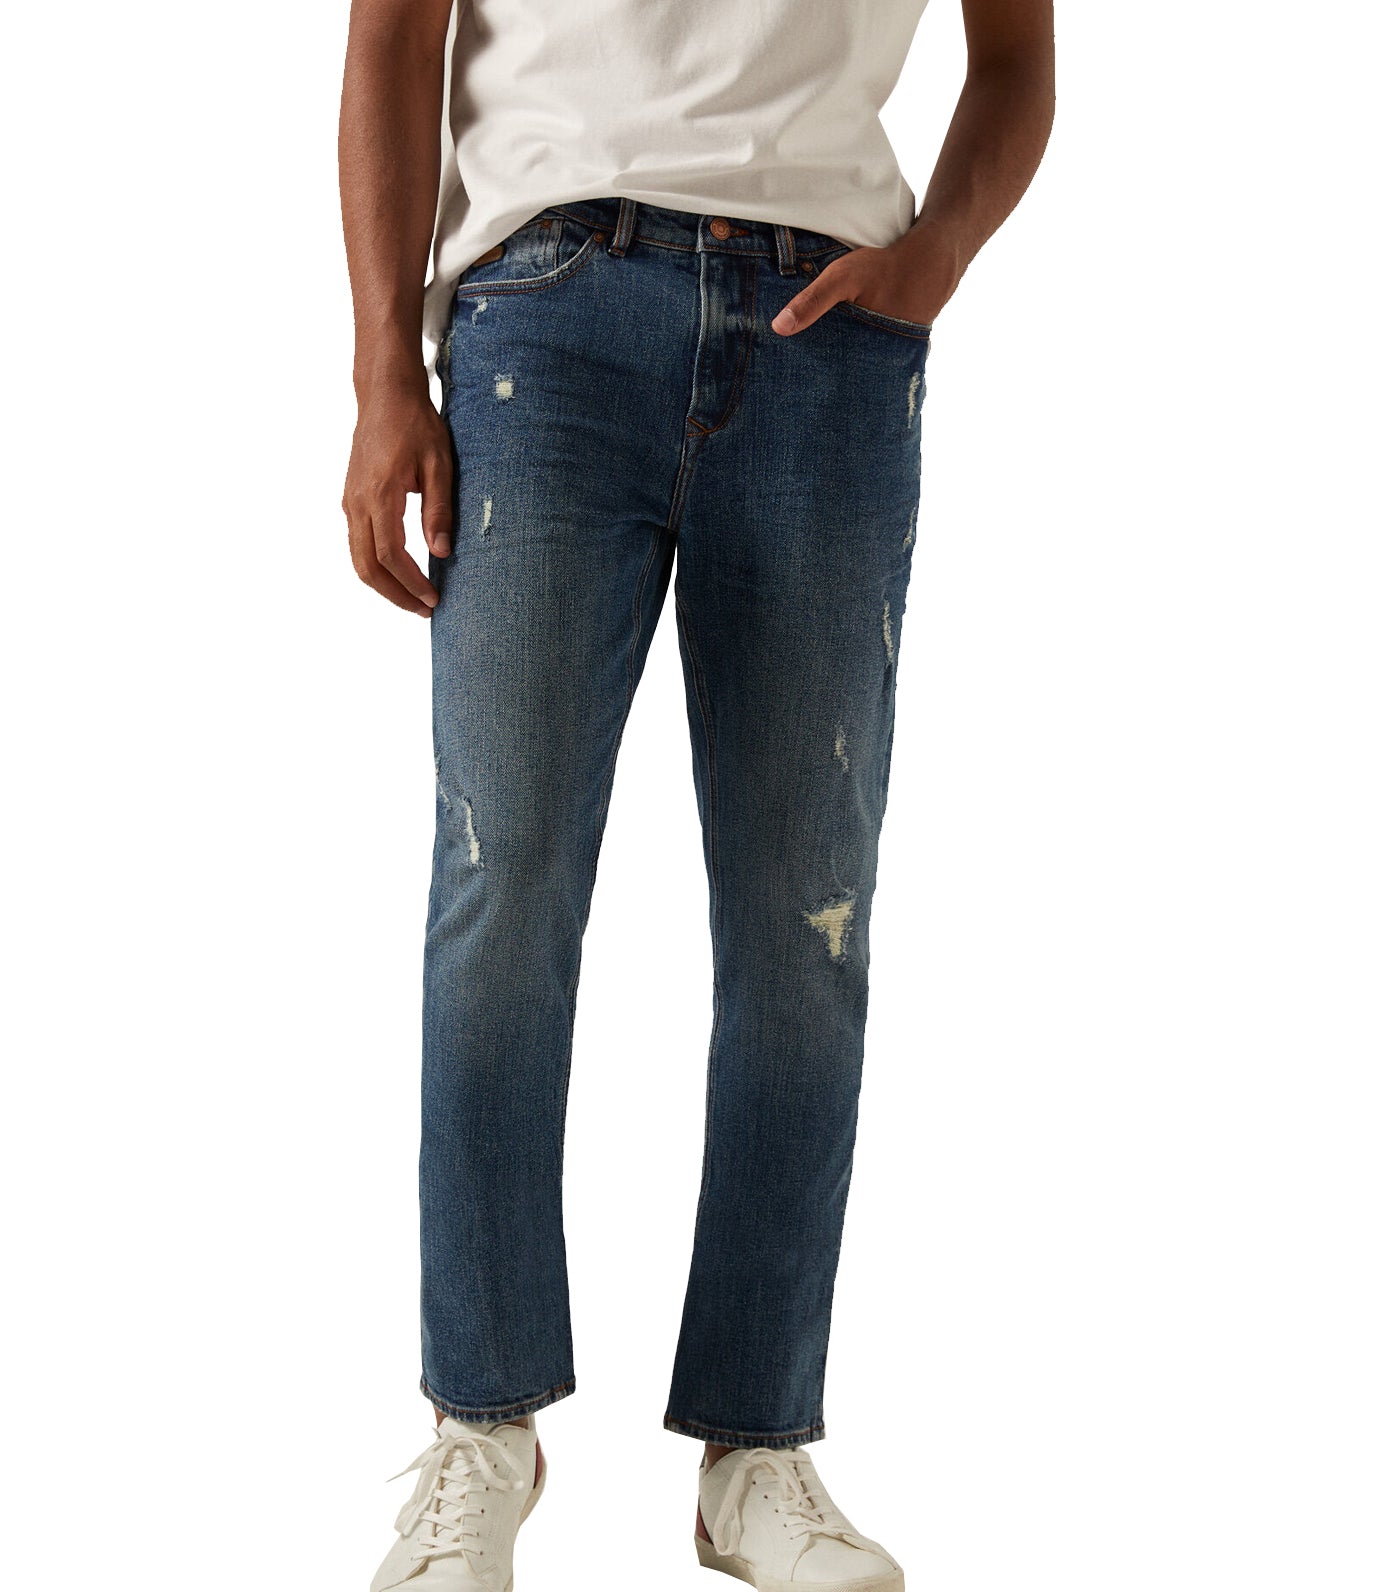 Medium Blue Washed Slim Fit Ripped Jeans